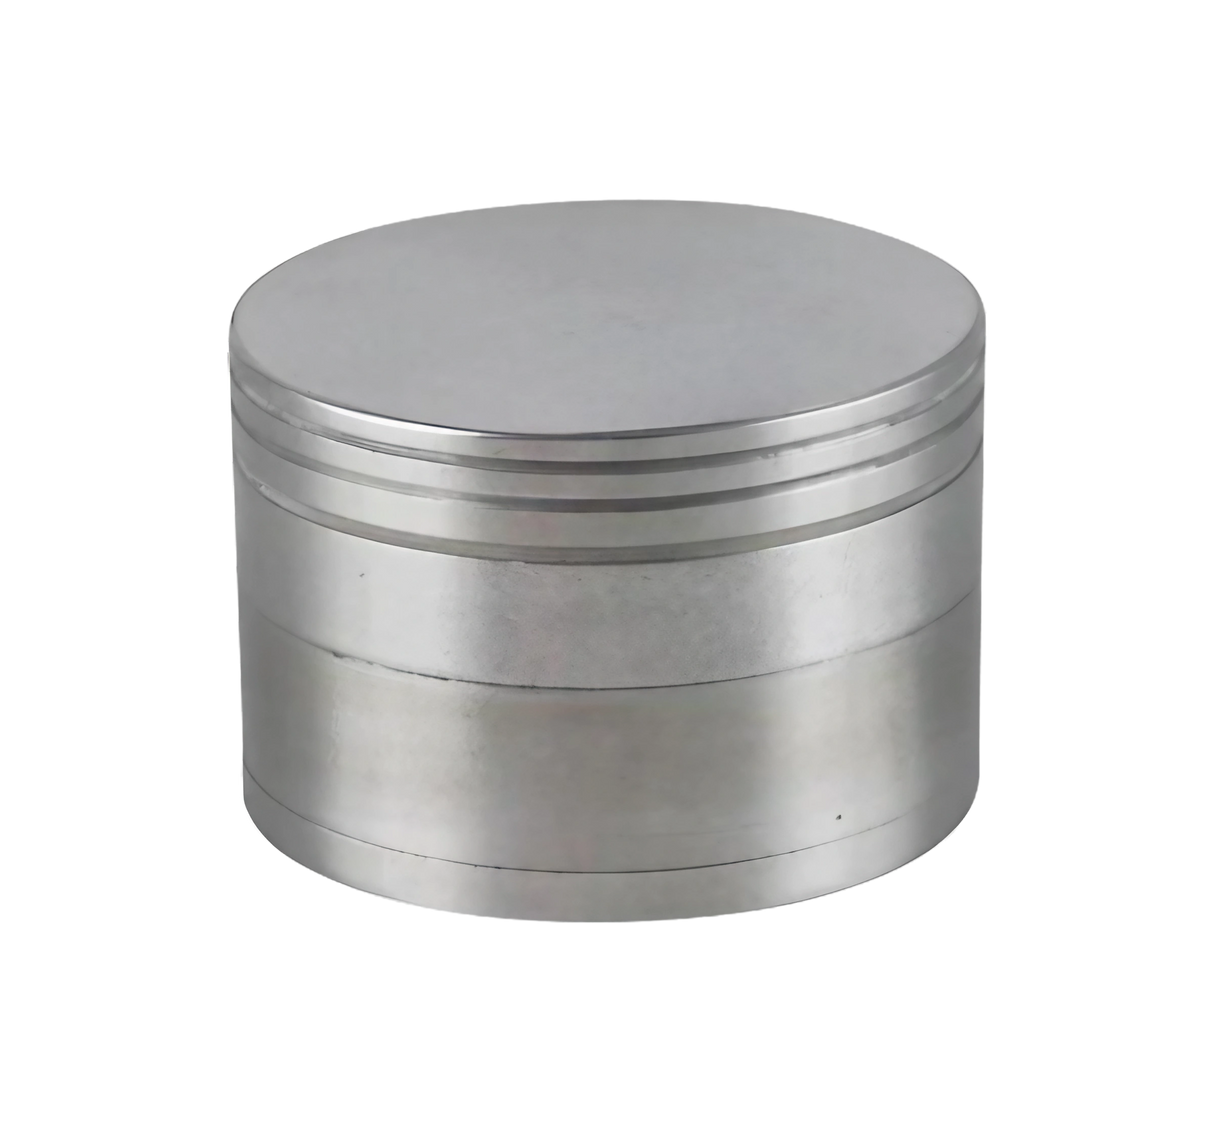 Classic 4-Piece Steel Grinder for Dry Herbs, 2" Diameter, Compact and Portable